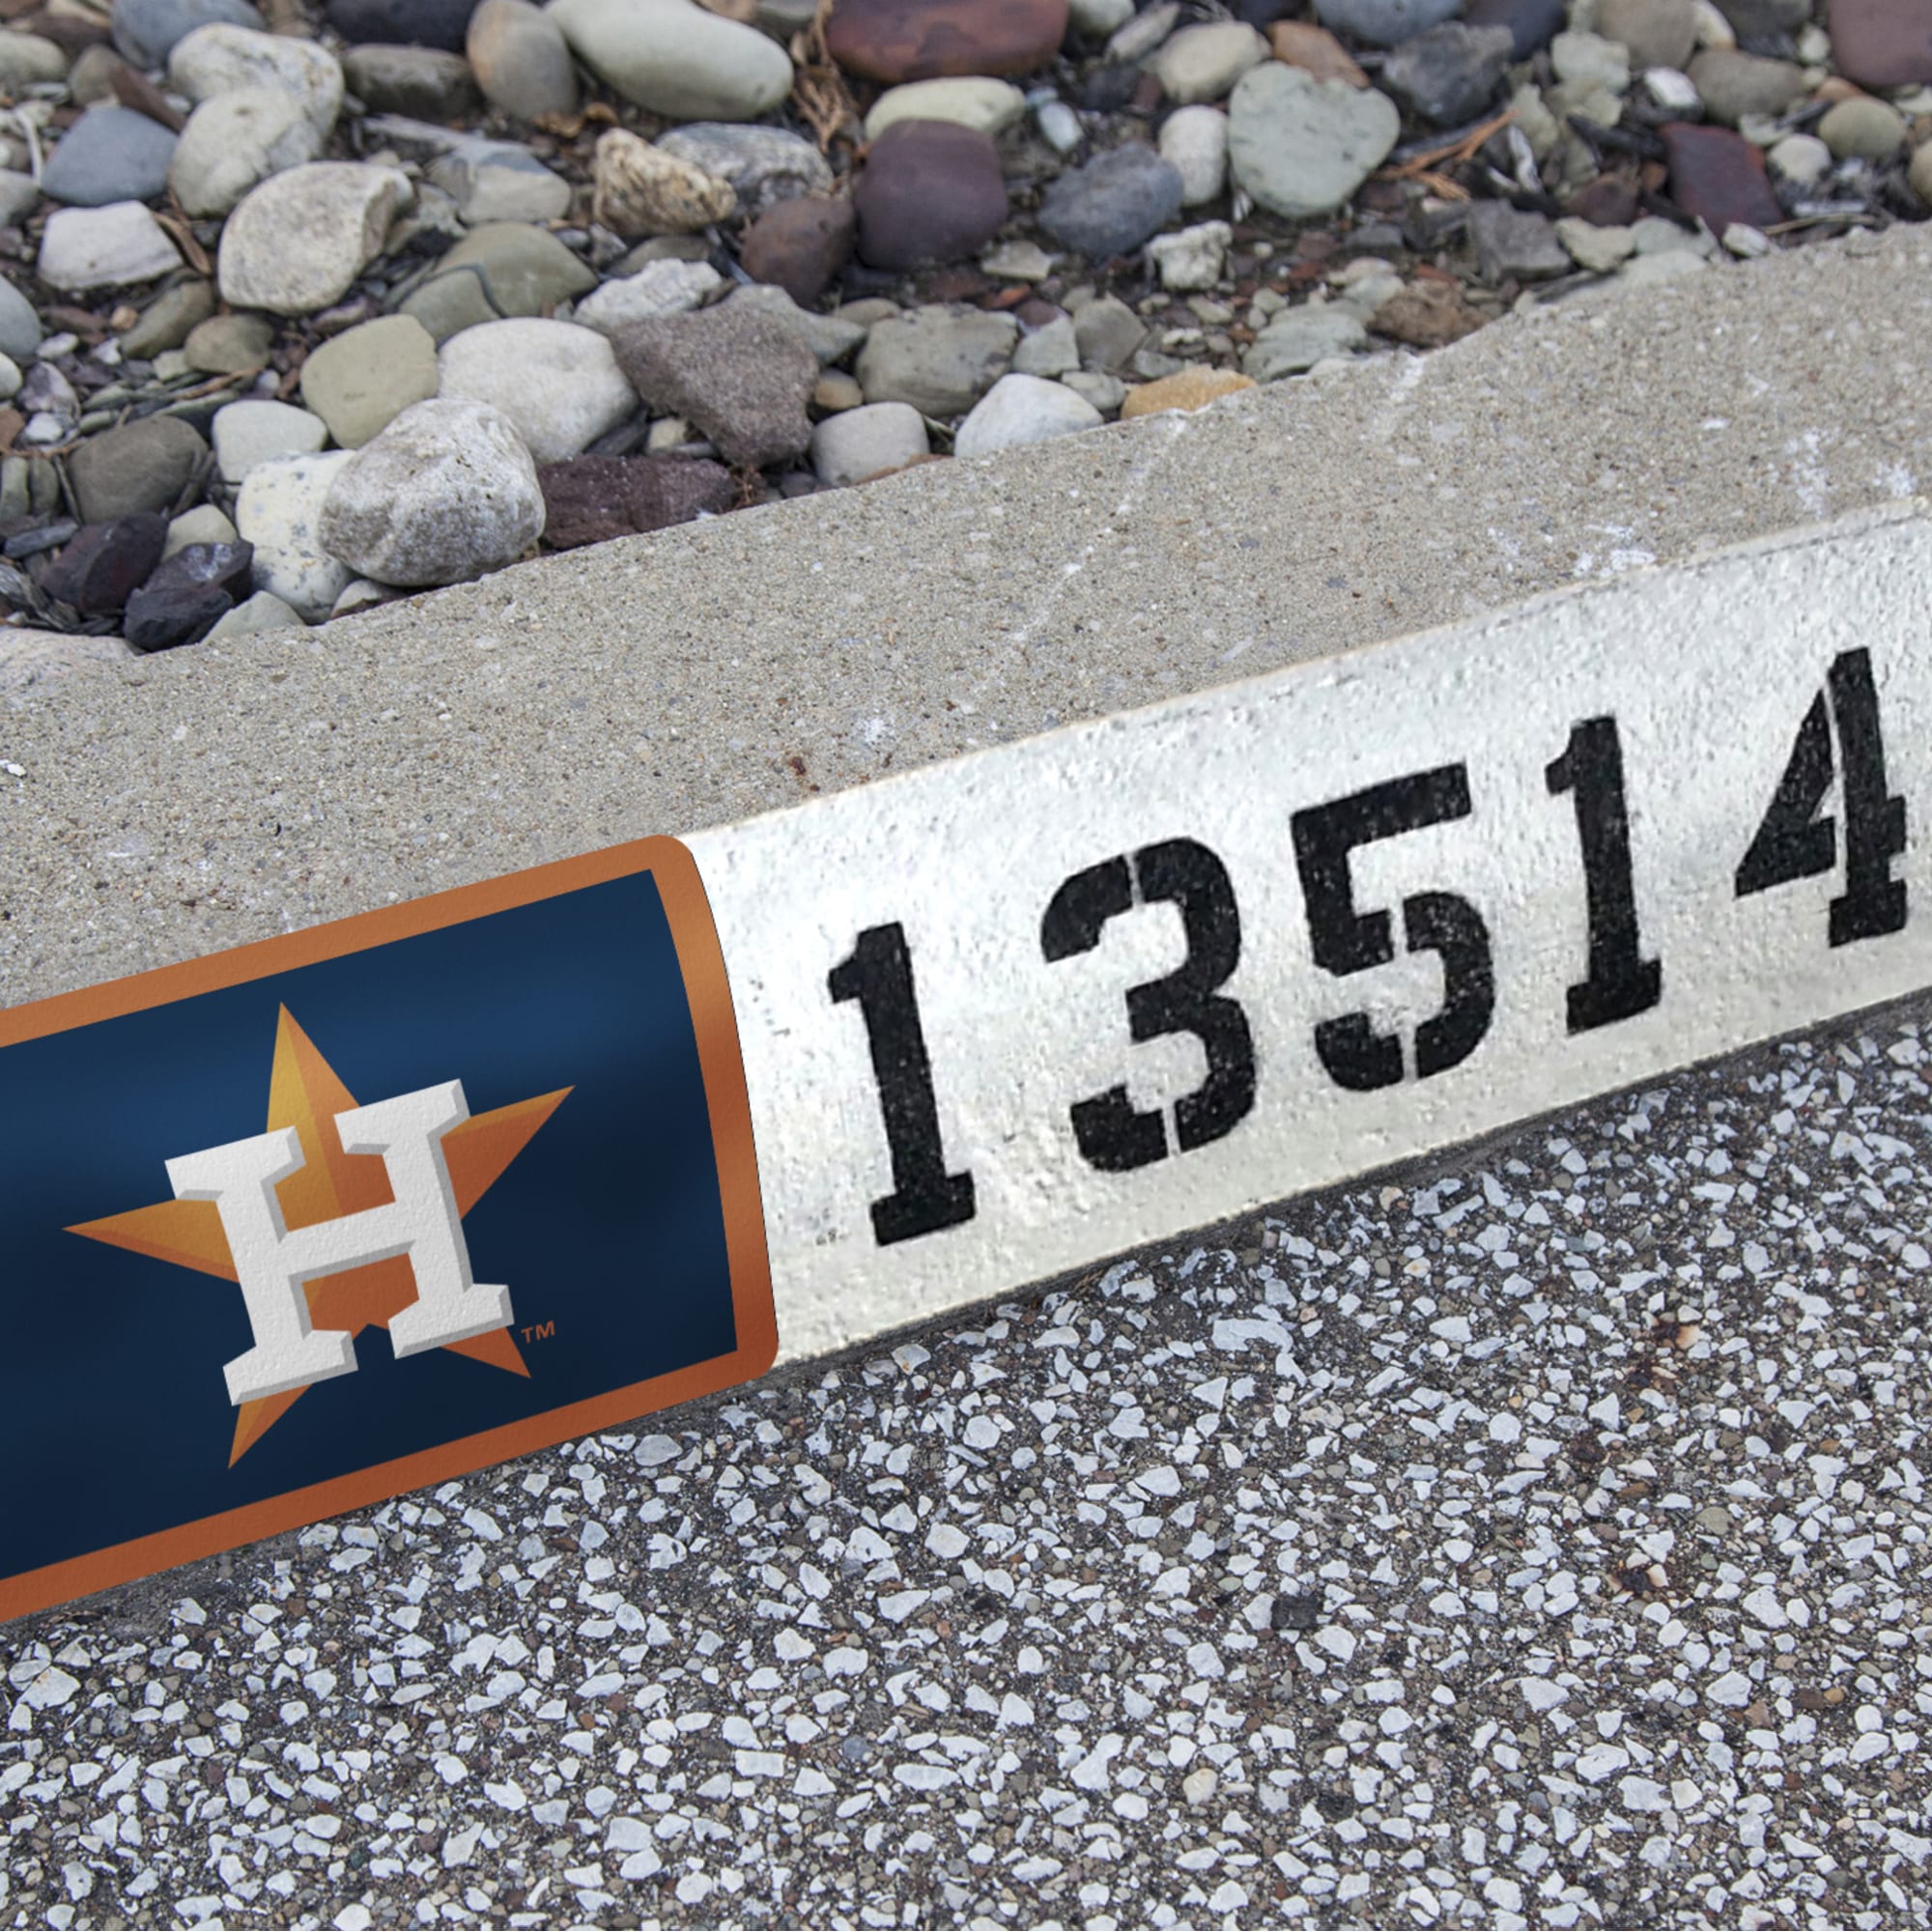 Houston Astros: Address Block - Officially Licensed MLB Outdoor Graphic 6.0"W x 8.0"H by Fathead | Wood/Aluminum